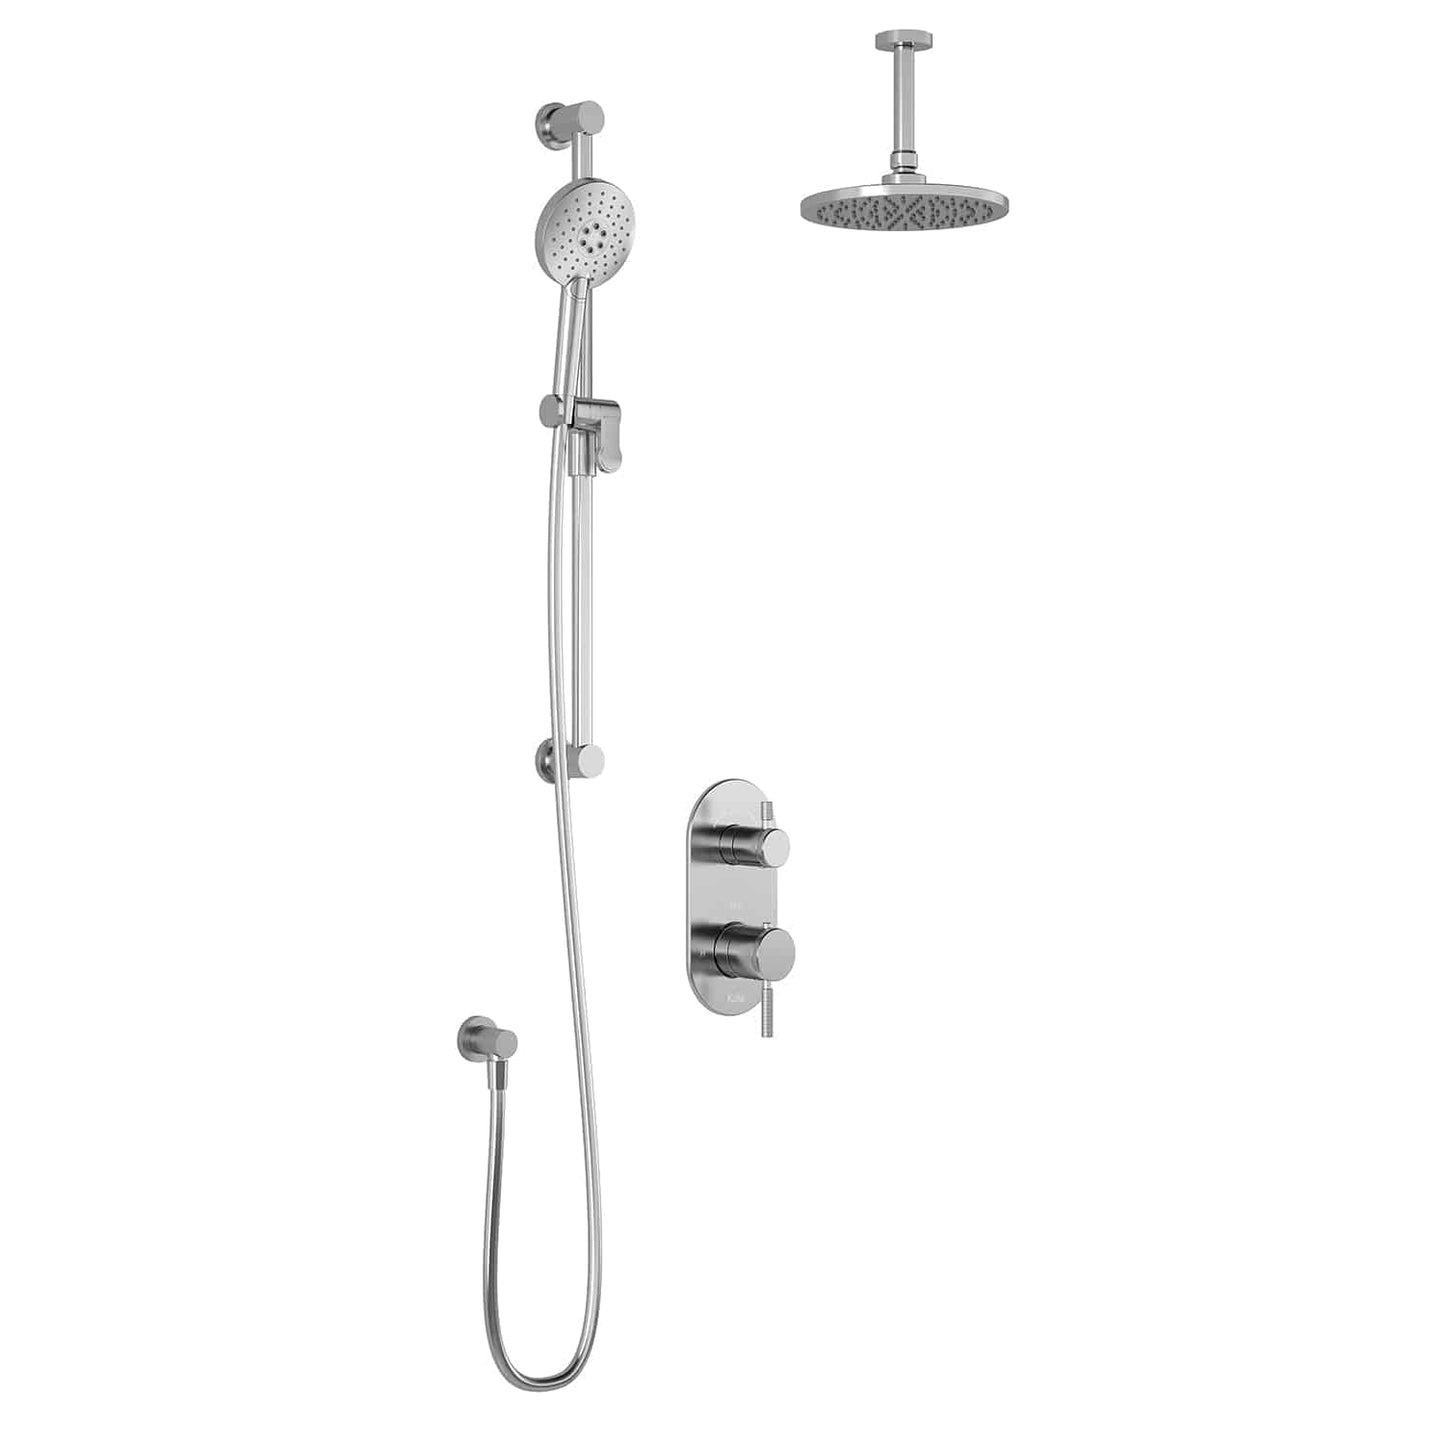 Kalia PRECISO TD2 AQUATONIK T/P with Diverter Shower System with 9" Round Shower Head and Round Hand Shower and Vertical Ceiling Arm -Chrome